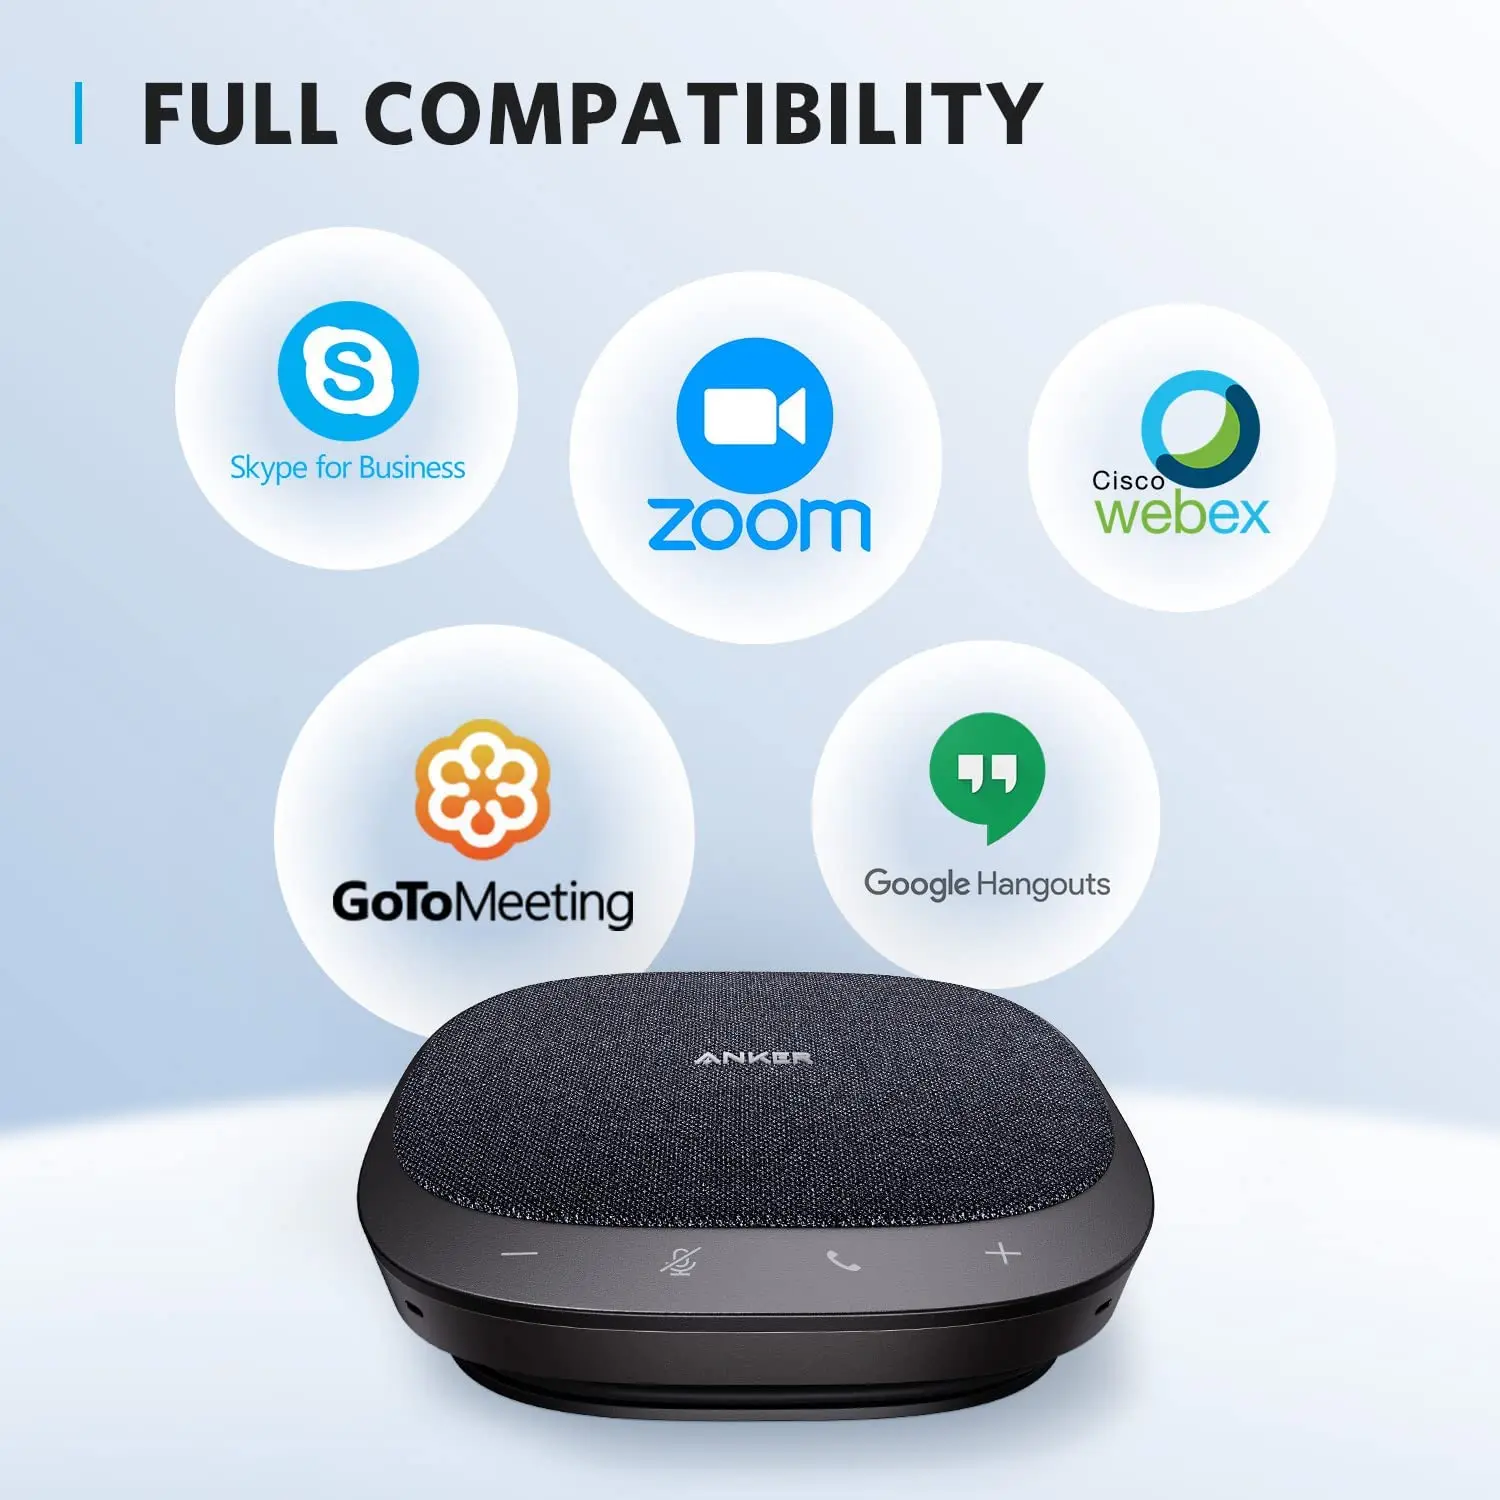 Anker PowerConf S330 USB Speakerphone, Conference Microphone for Home Office, Smart Voice Enhancement, Plug and Play images - 6